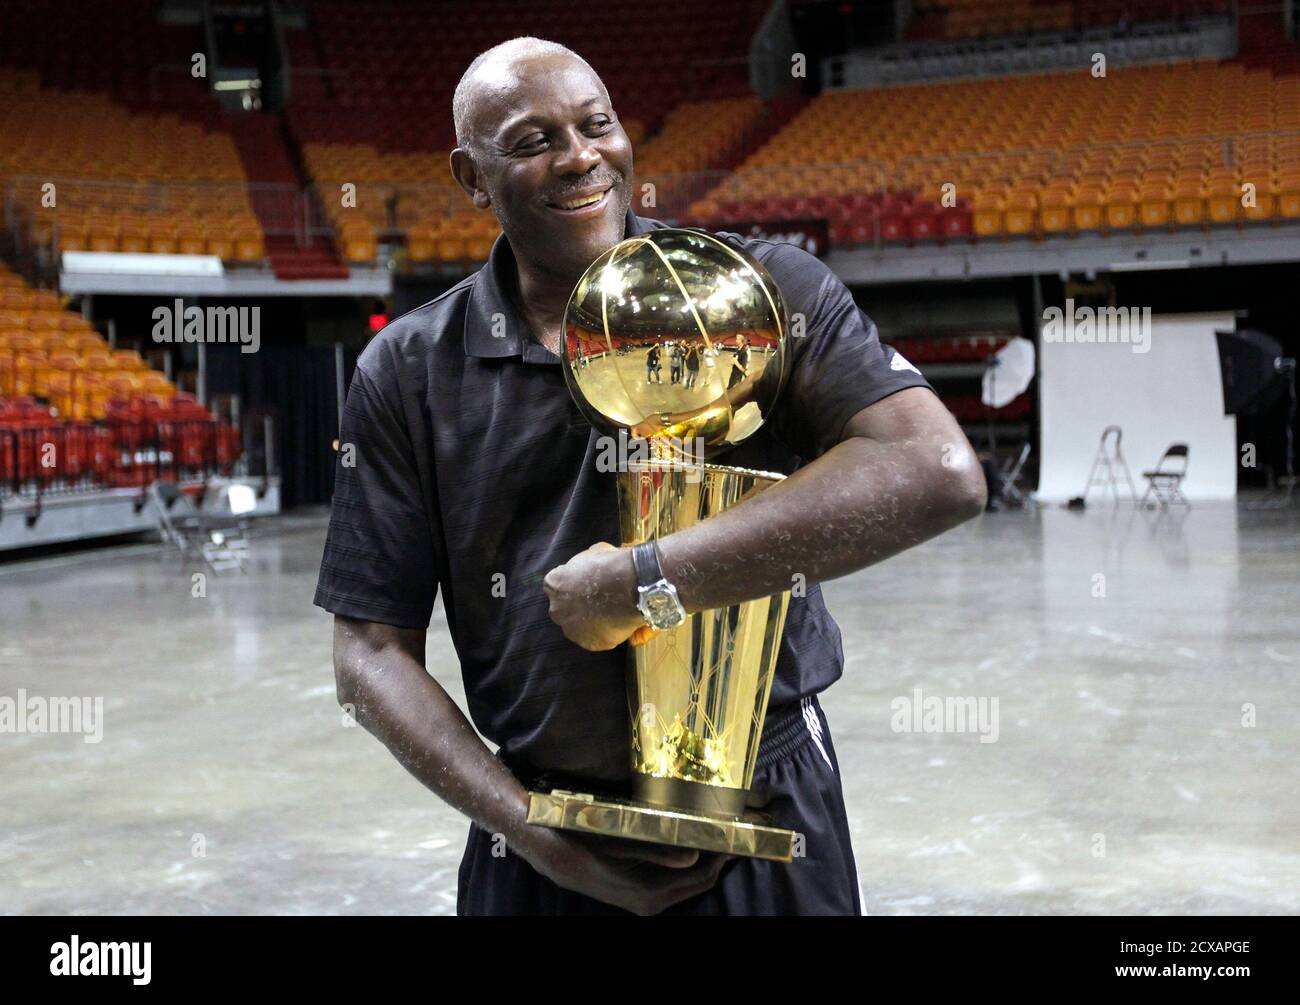 Heat Assistant Coach Bob McAdoo poses with the team's championship trophy  during media day at the Miami Heat's home arena in Miami, Florida September  28, 2012. REUTERS/Andrew Innerarity (UNITED STATES - Tags: